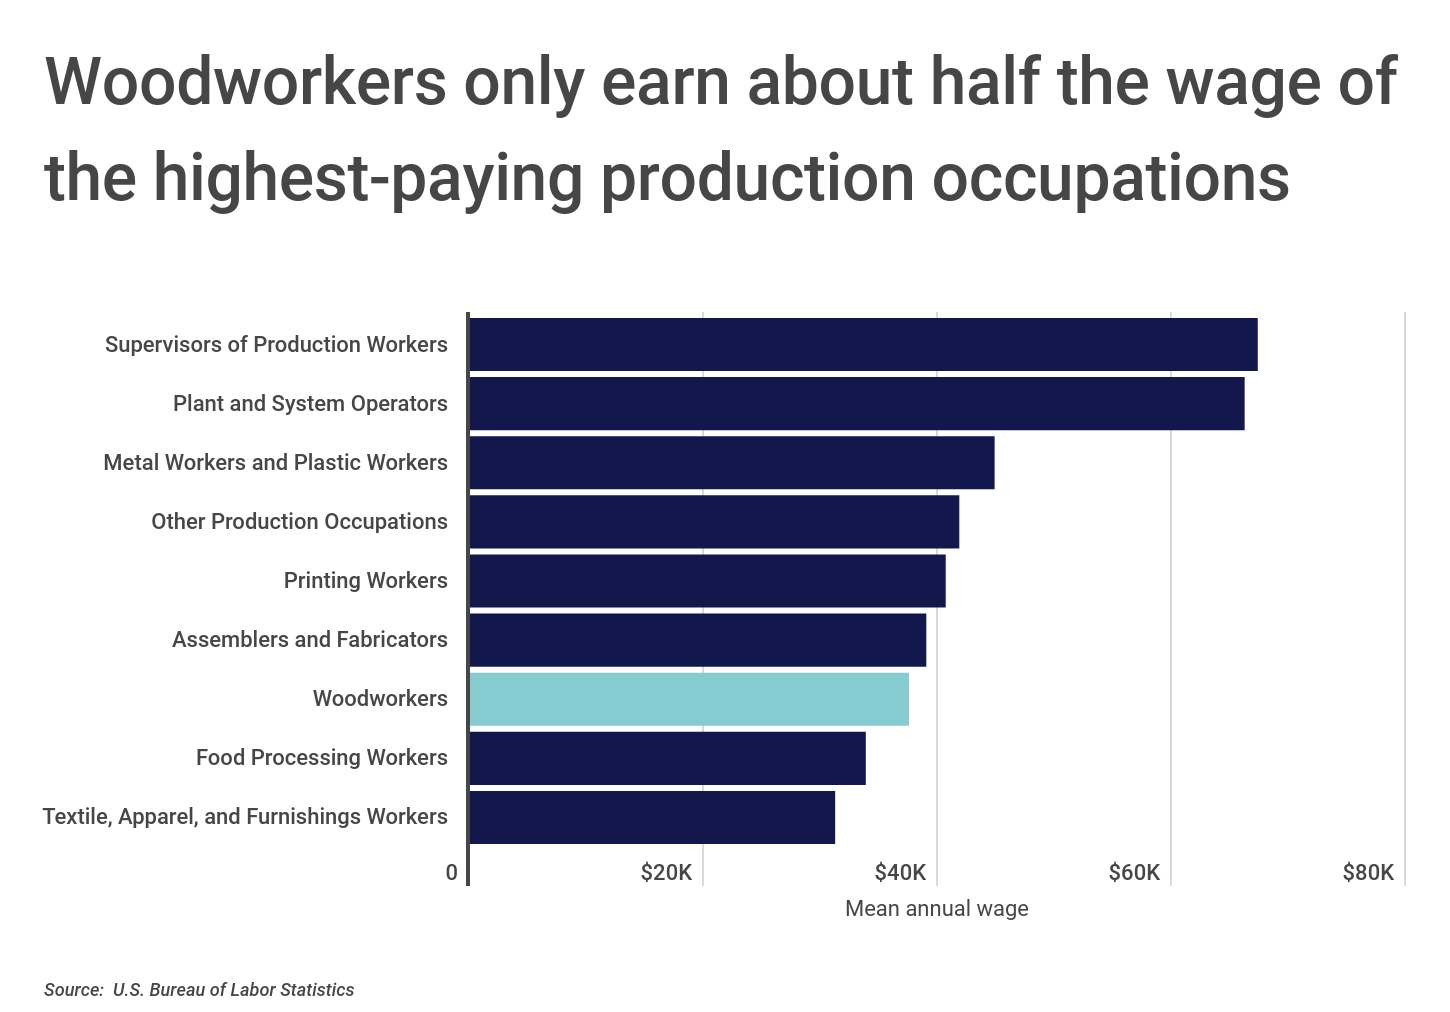 Chart2_Woodworkers earnings compared to other production occupation earnings